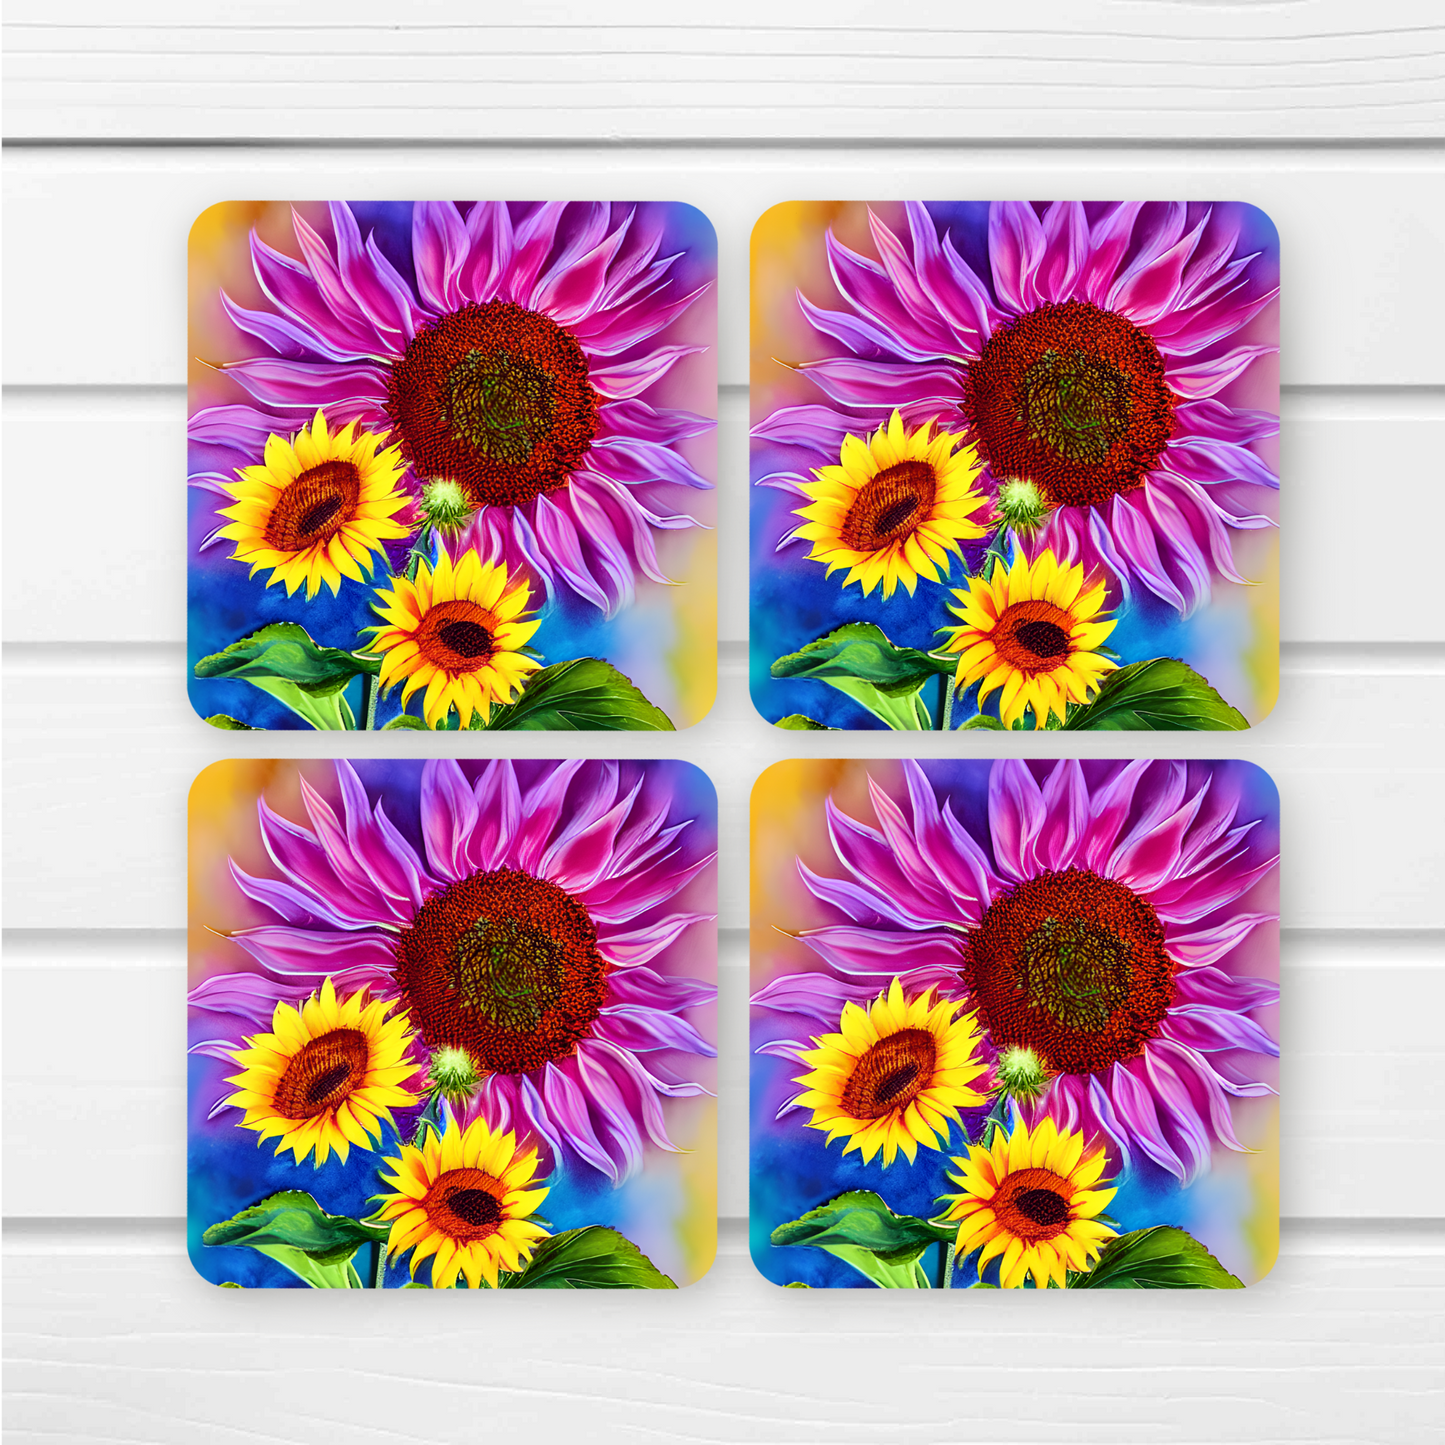 Beautifully Printed  Glowing Sunflowers Wooden Coasters for Stylish Home Décor